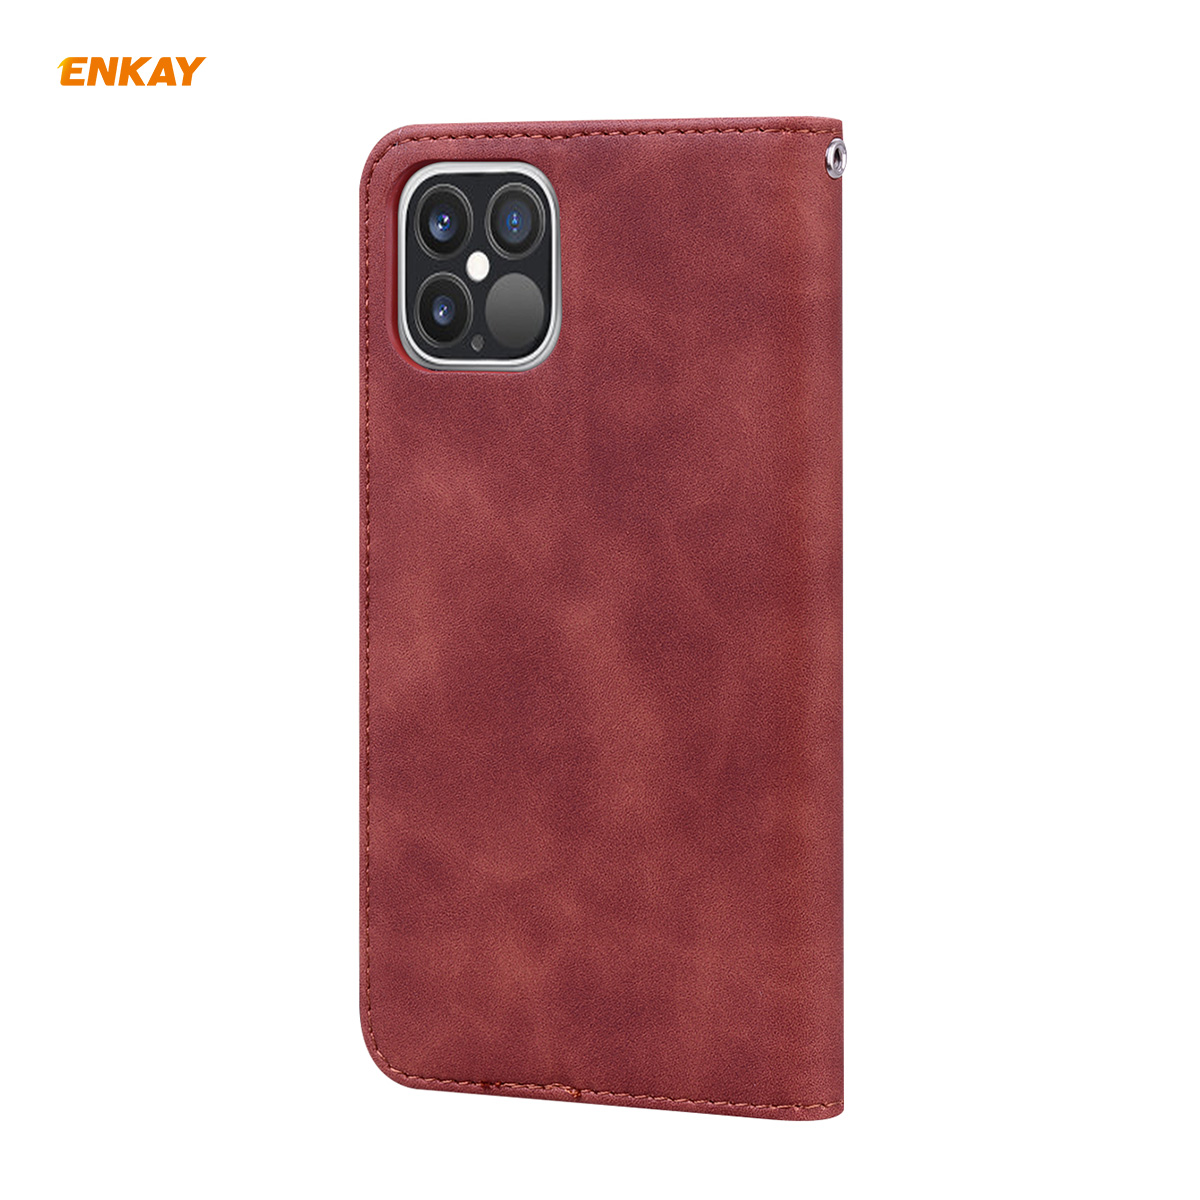 Enkay-for-iPhone-12-Pro-Max-Case-Business-Magnetic-Flip-with-Card-Slot-Stand-PU-Leather--TPU-Full-Co-1755830-15